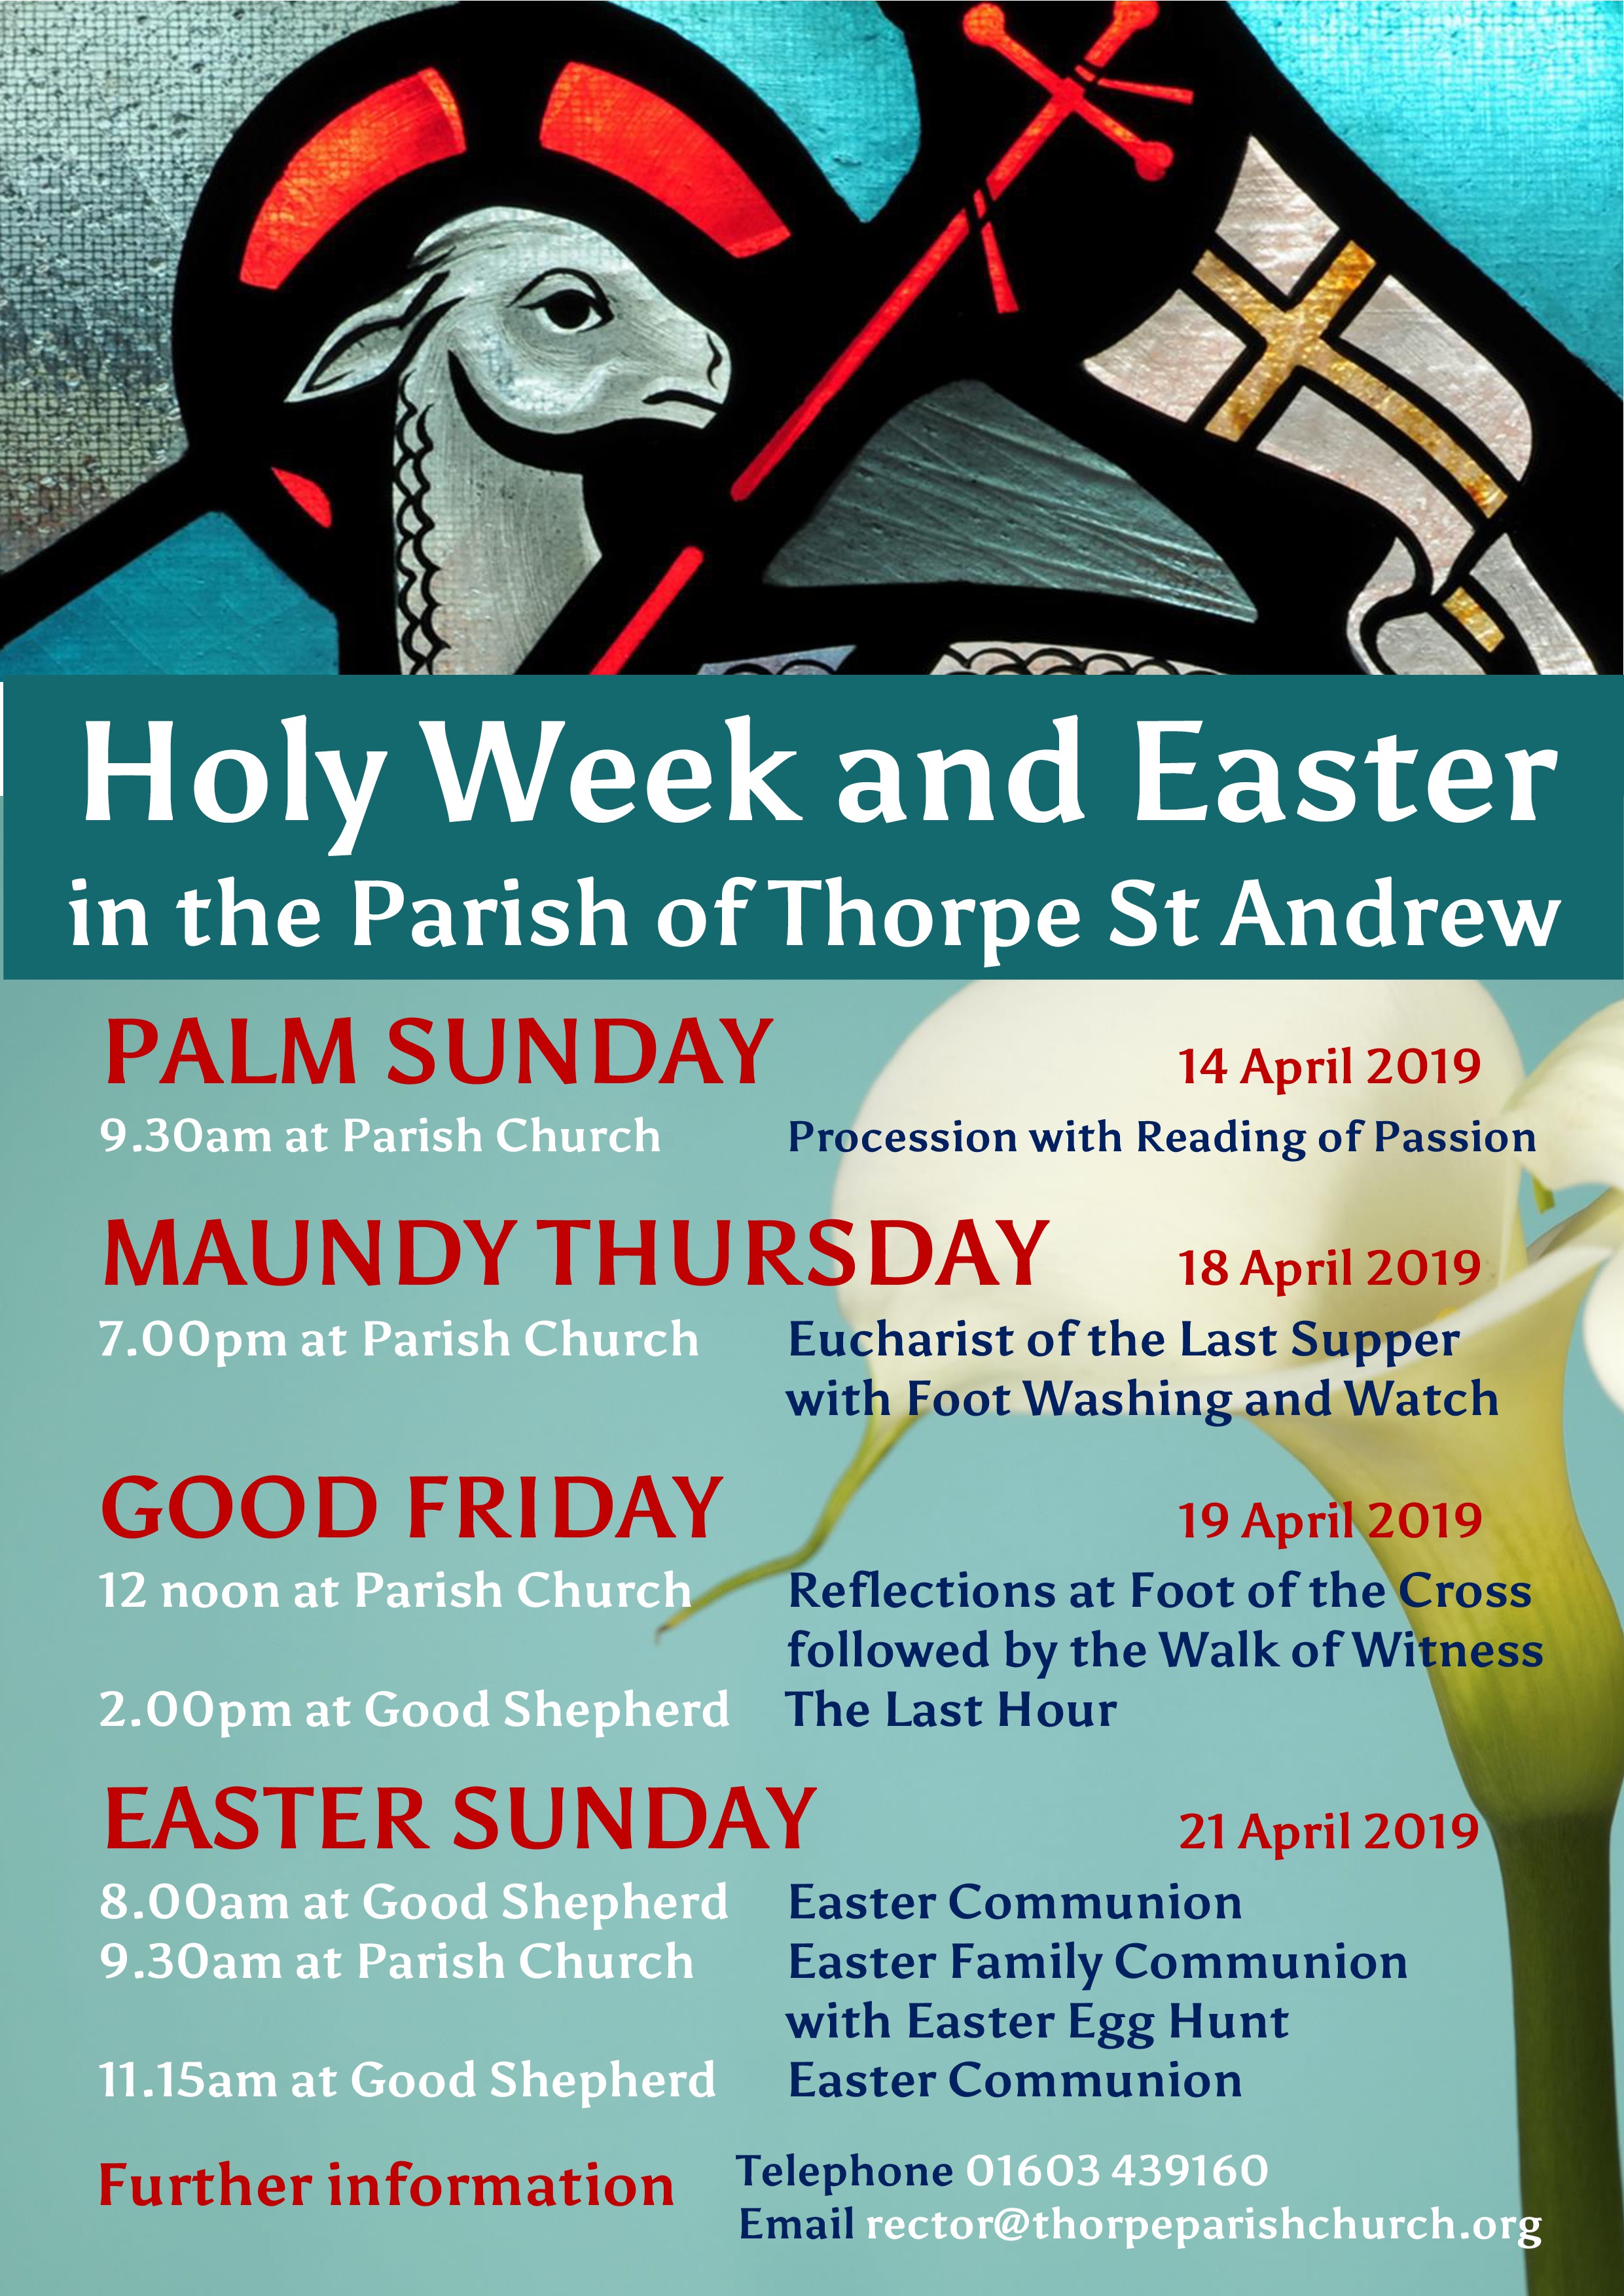 Holy Week and Easter Services